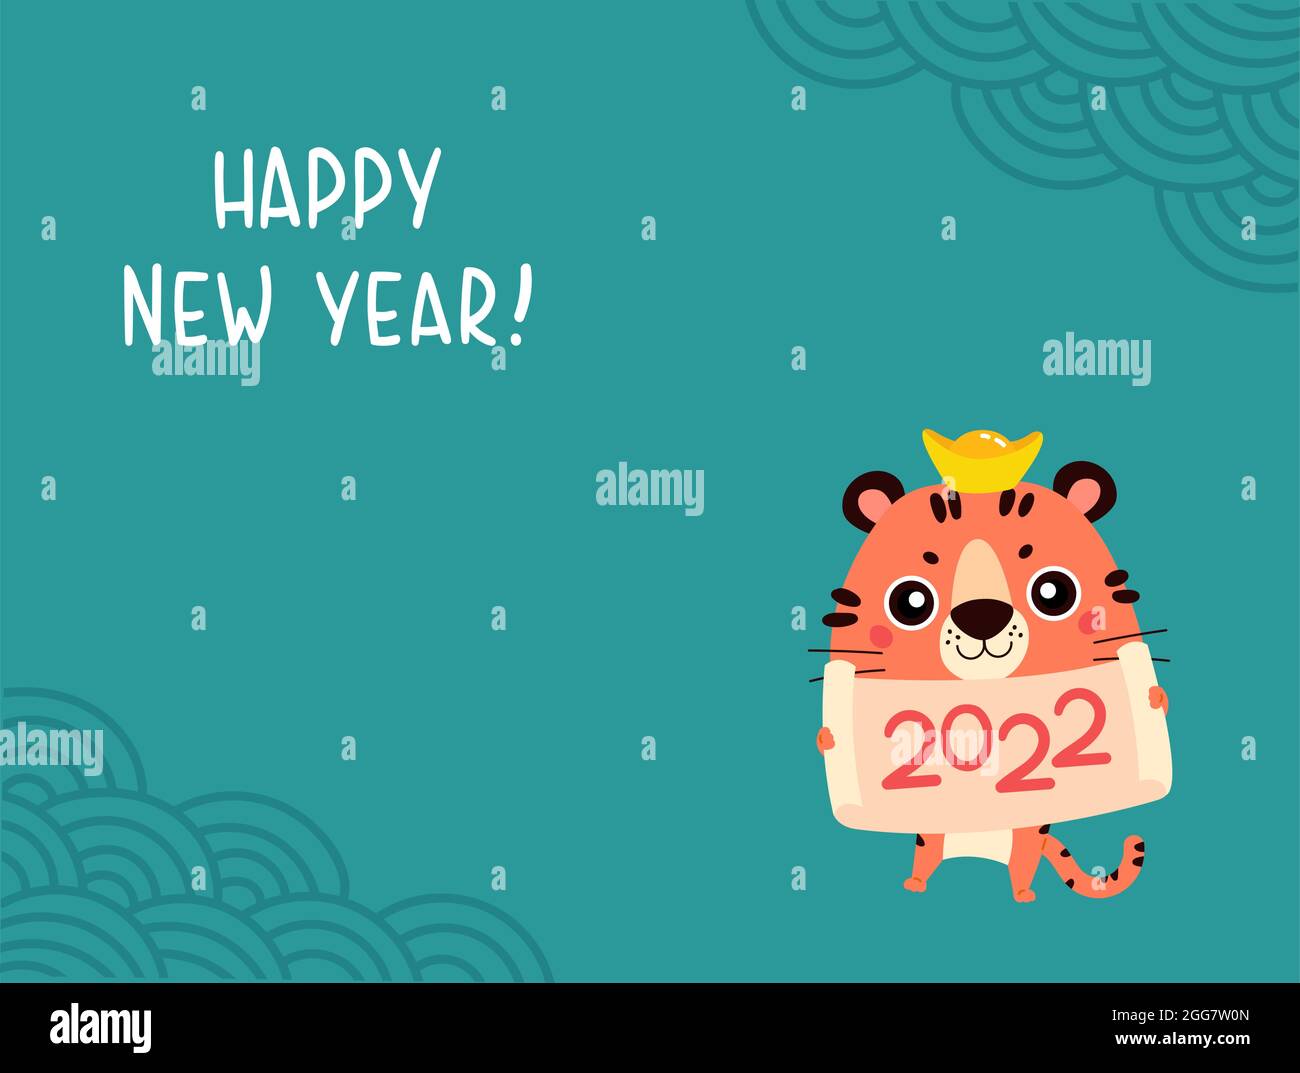 happy-chinese-new-year-greeting-card-2022-stock-vector-image-art-alamy